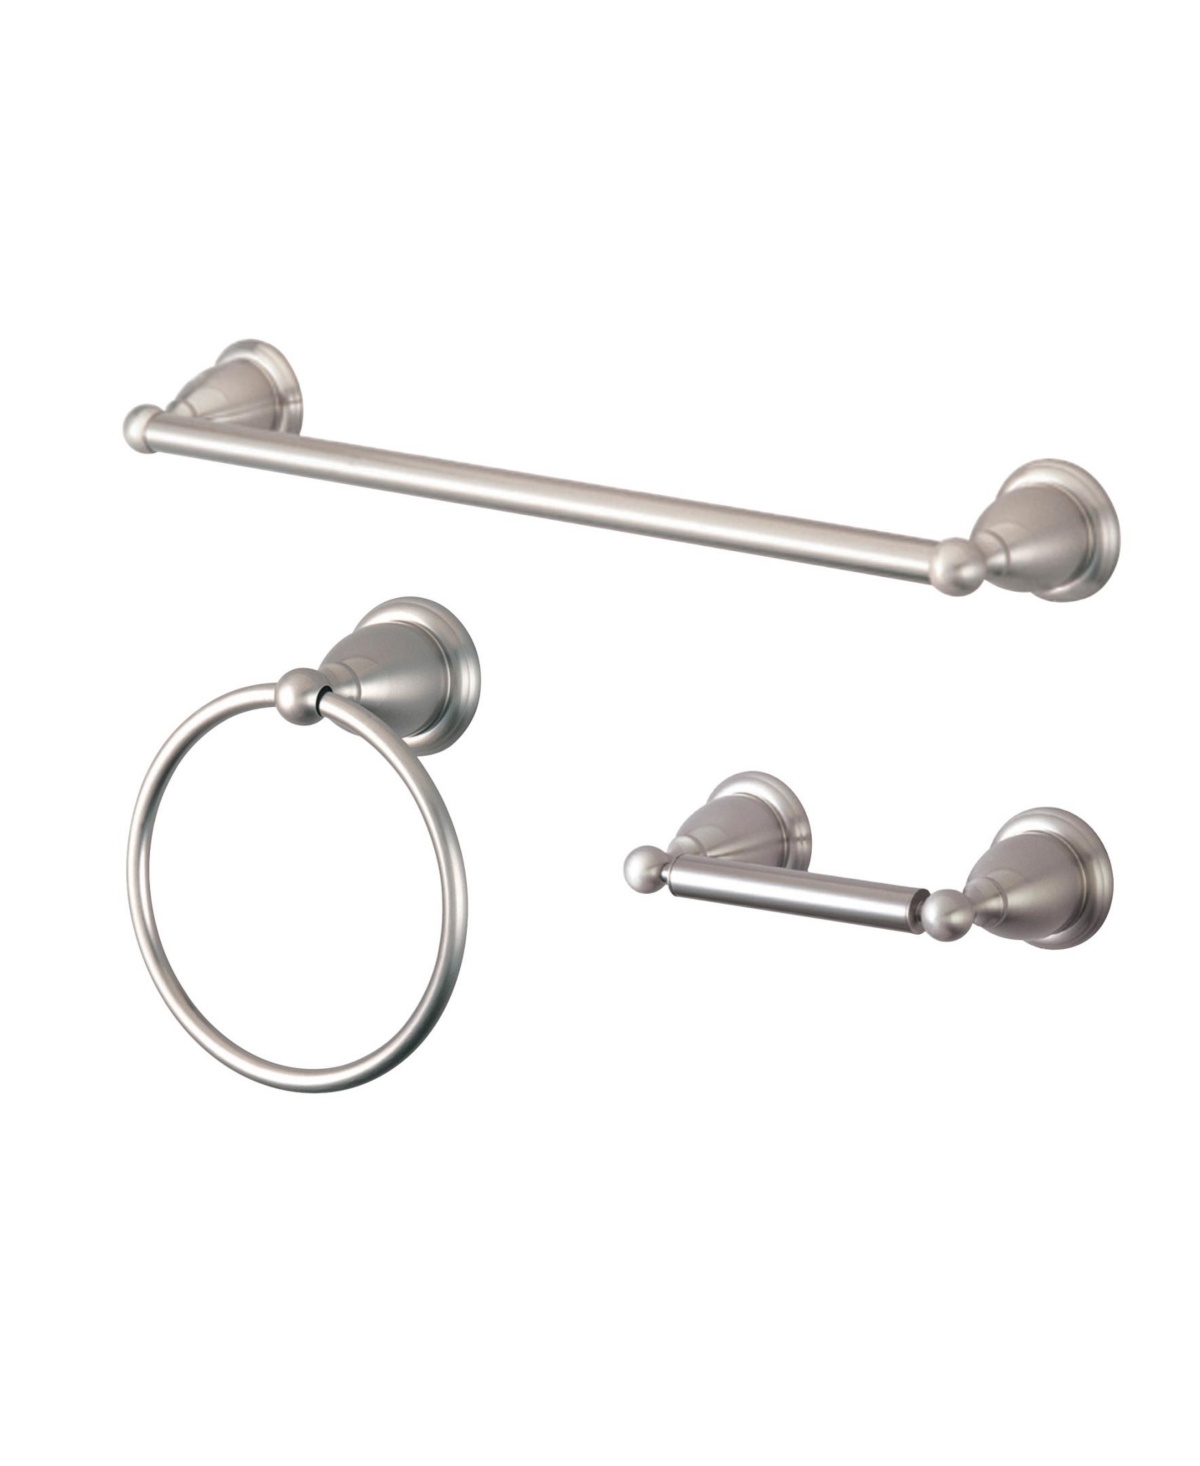 Kingston Brass Heritage 3-Pc. Bathroom Accessory Set in Brushed Nickel Bedding